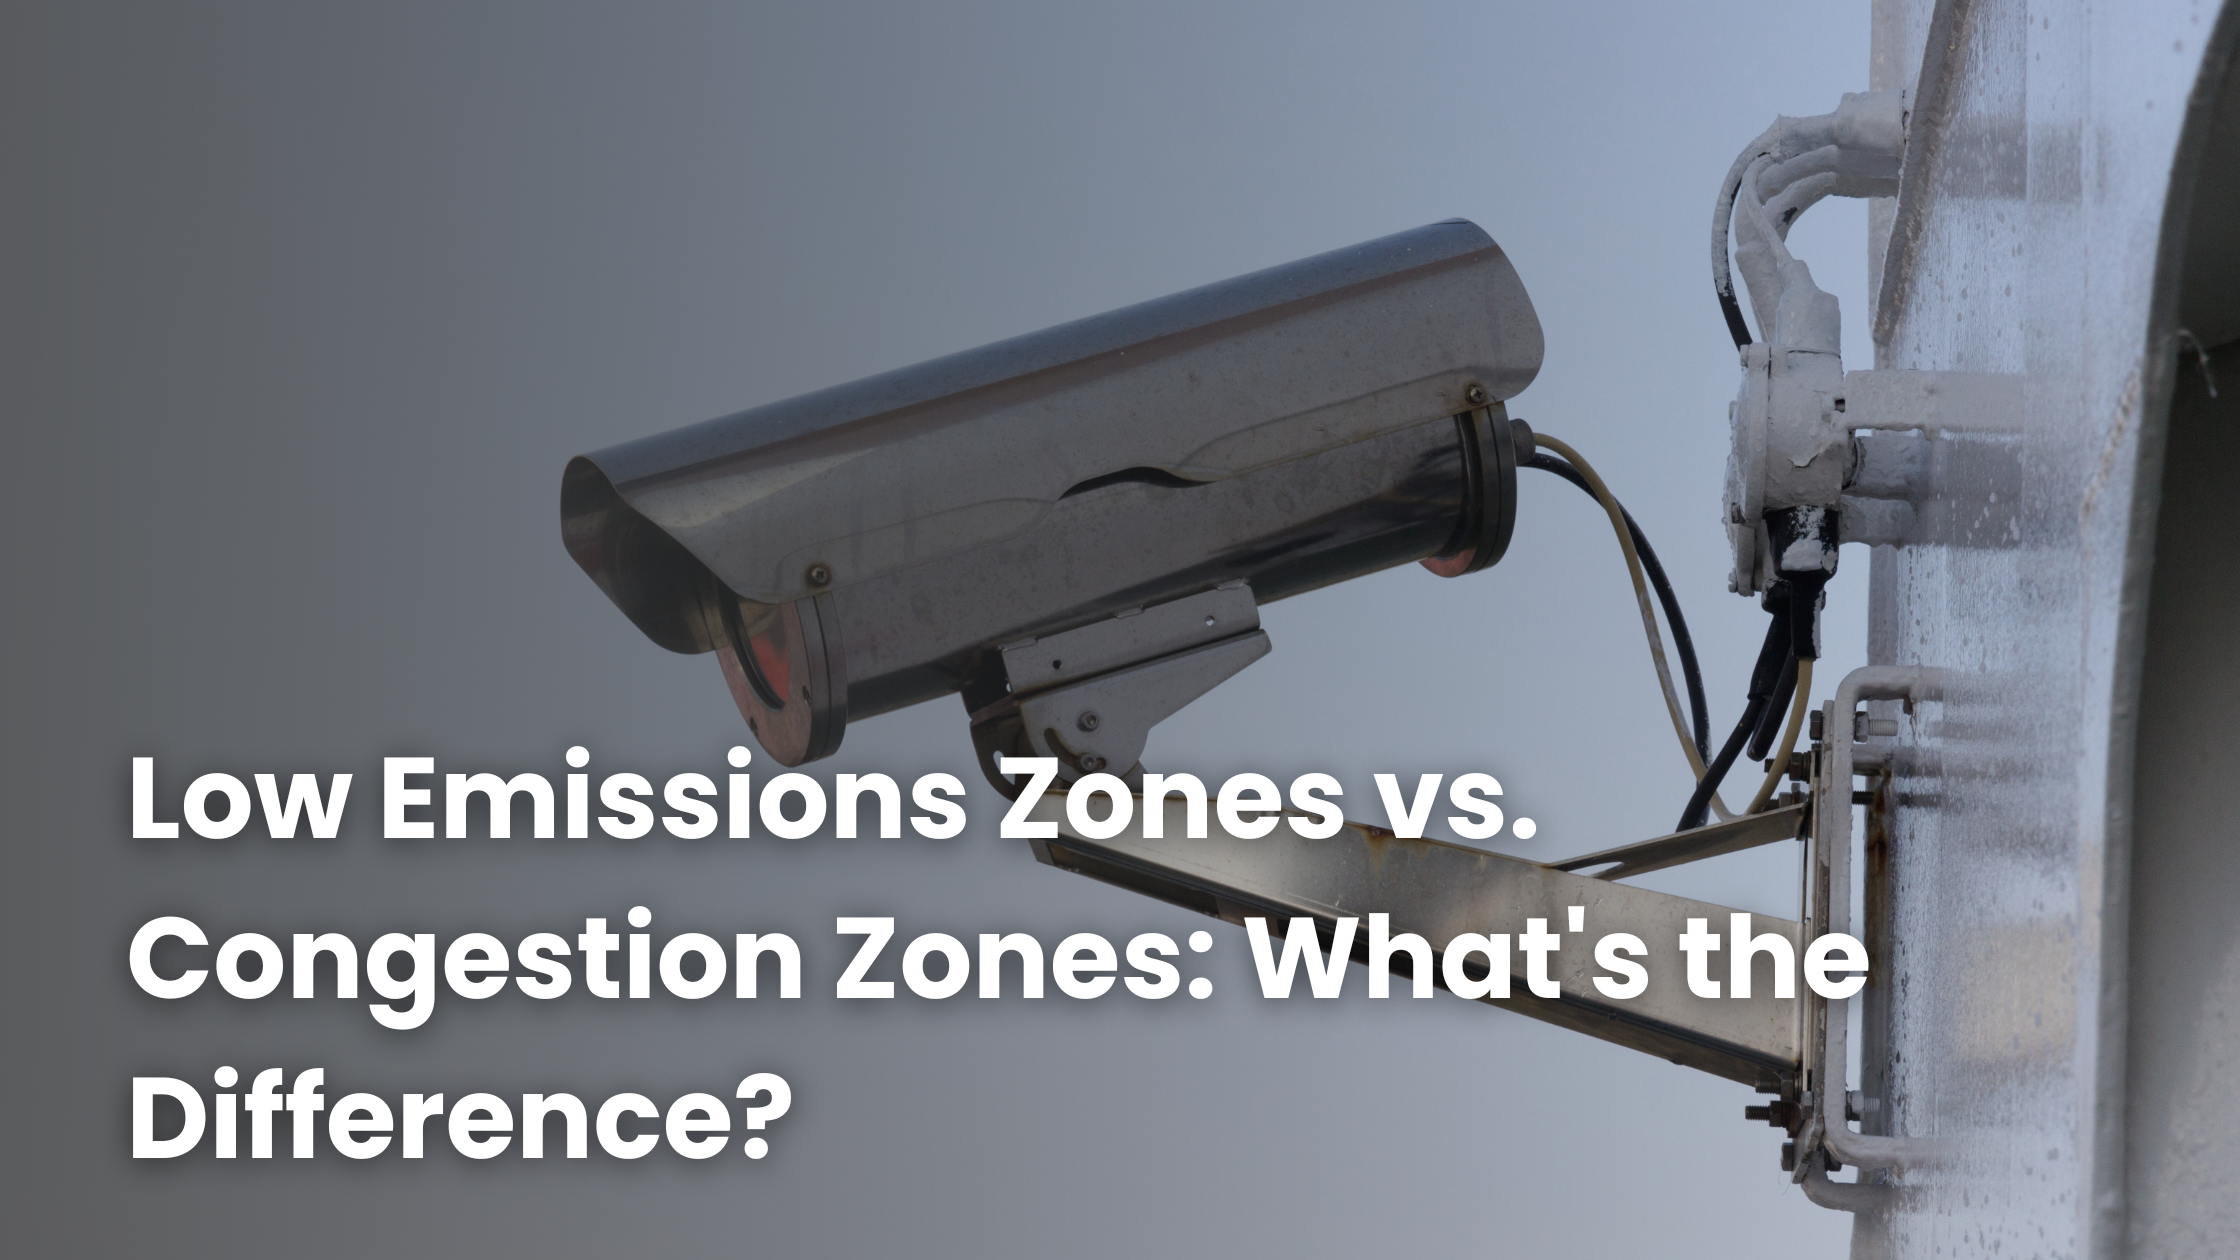 Low Emissions Zones vs. Congestion Zones: What's the Difference?